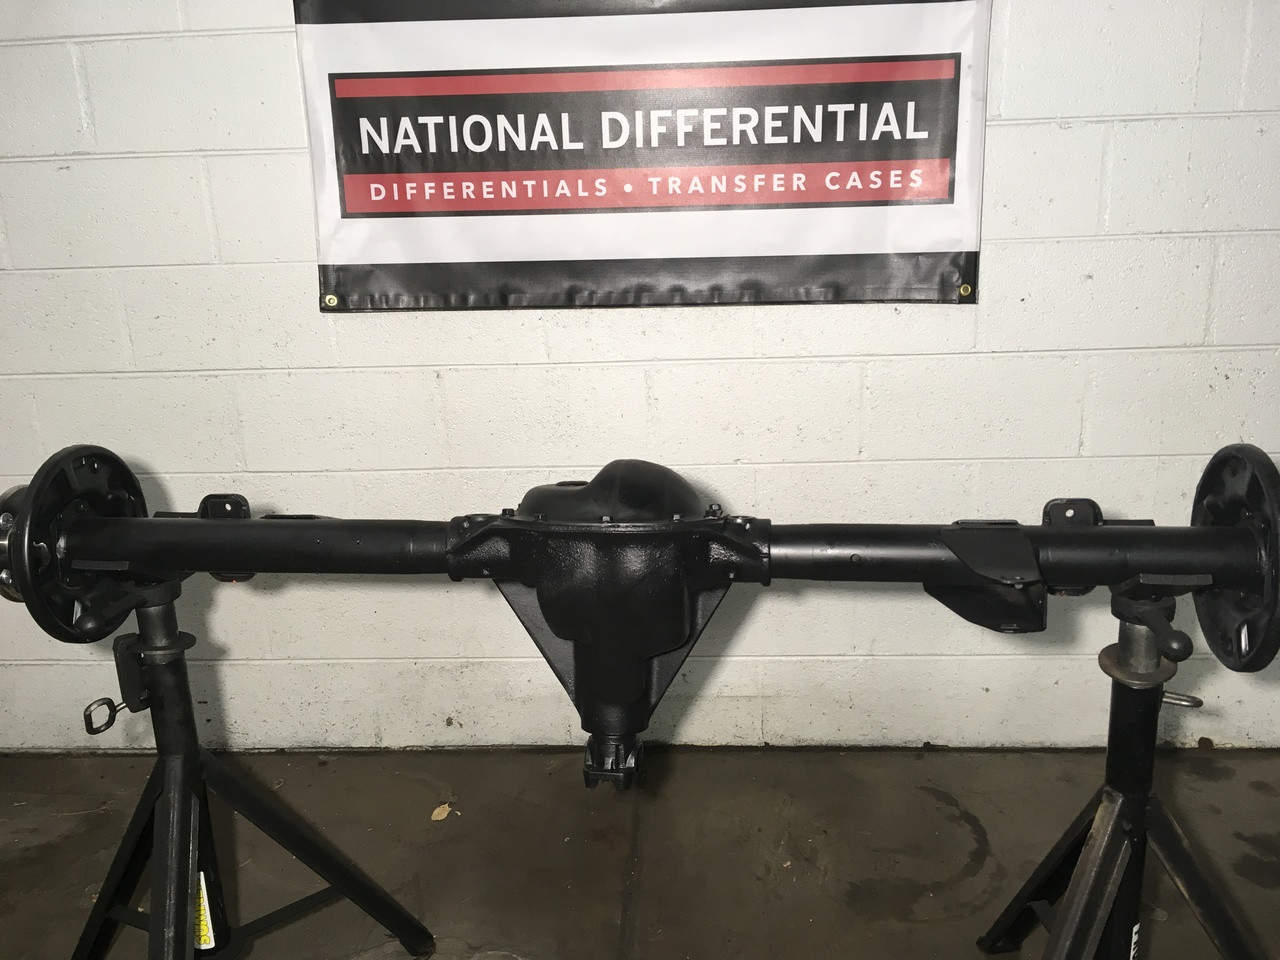 Jeep Differentials for Sale - Jeep Axles for Sale